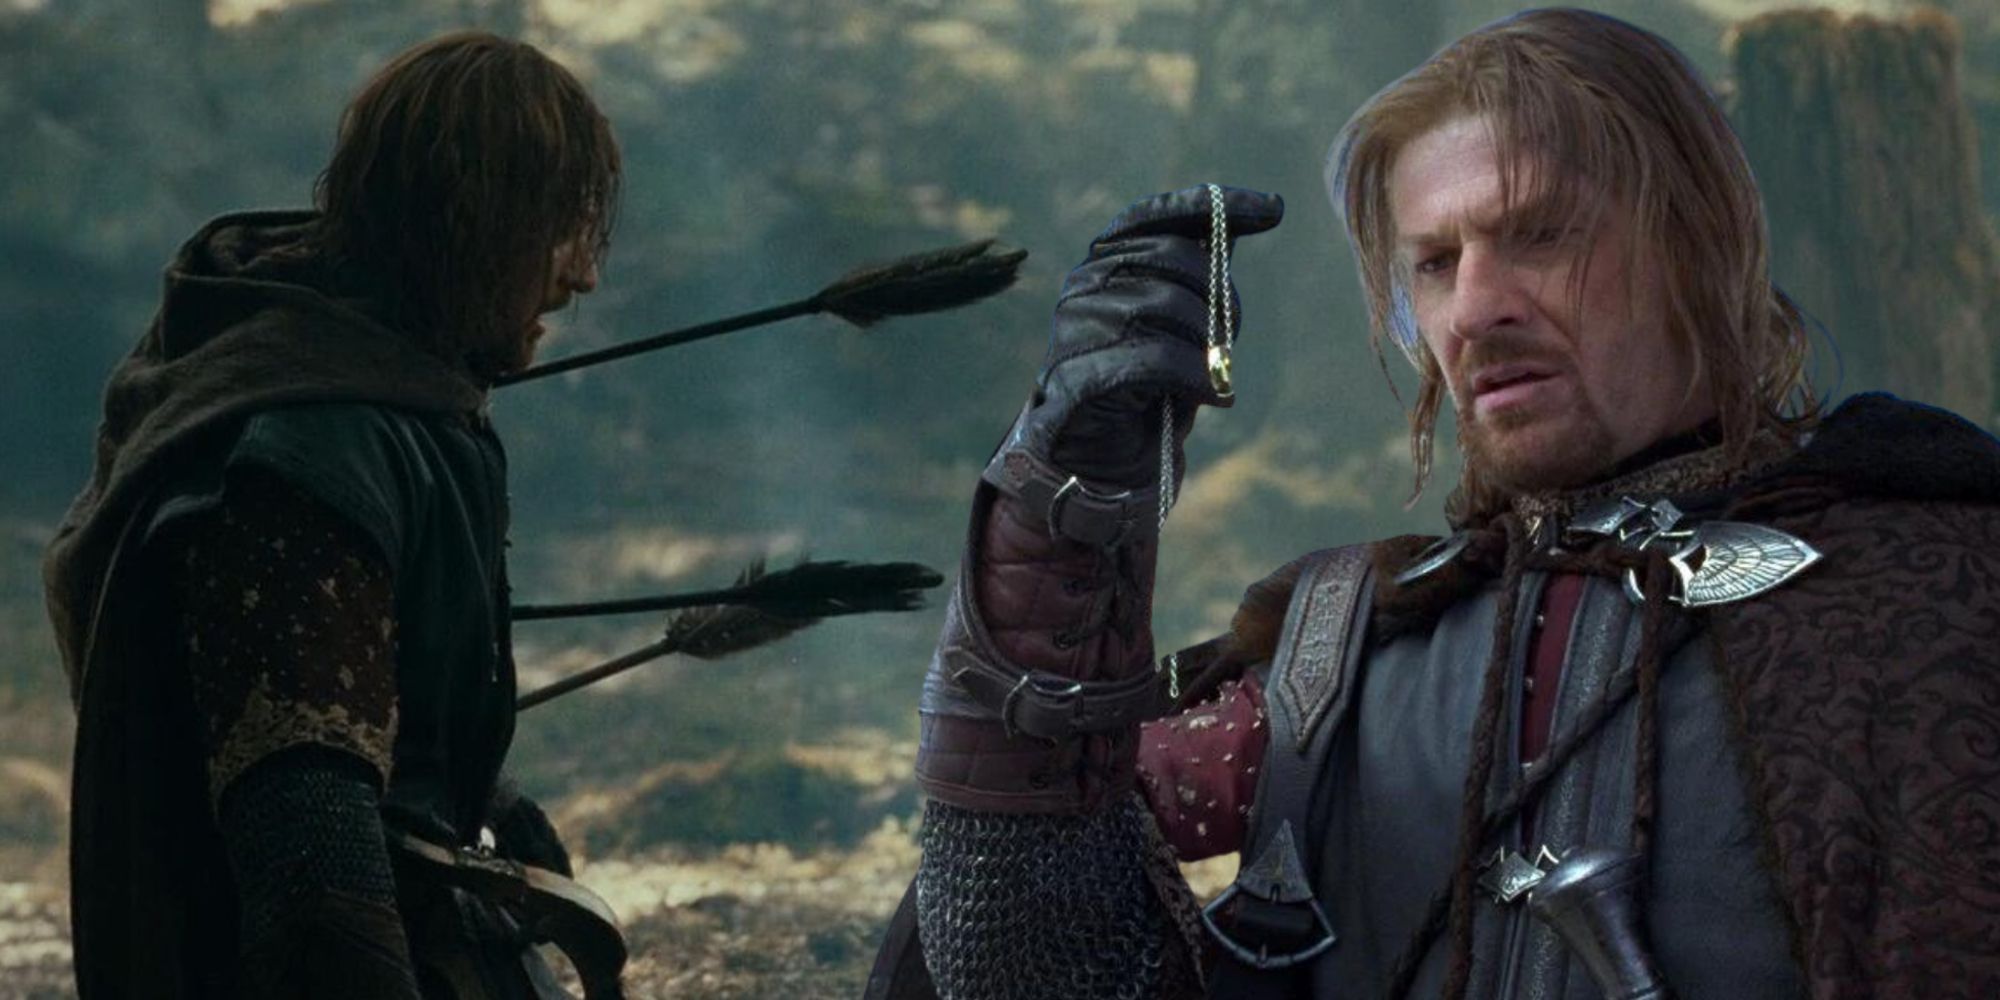 A joined image of Boramir injured by three arrows on the left and Boromir holding the One Ring on the right from The Lord of the Rings